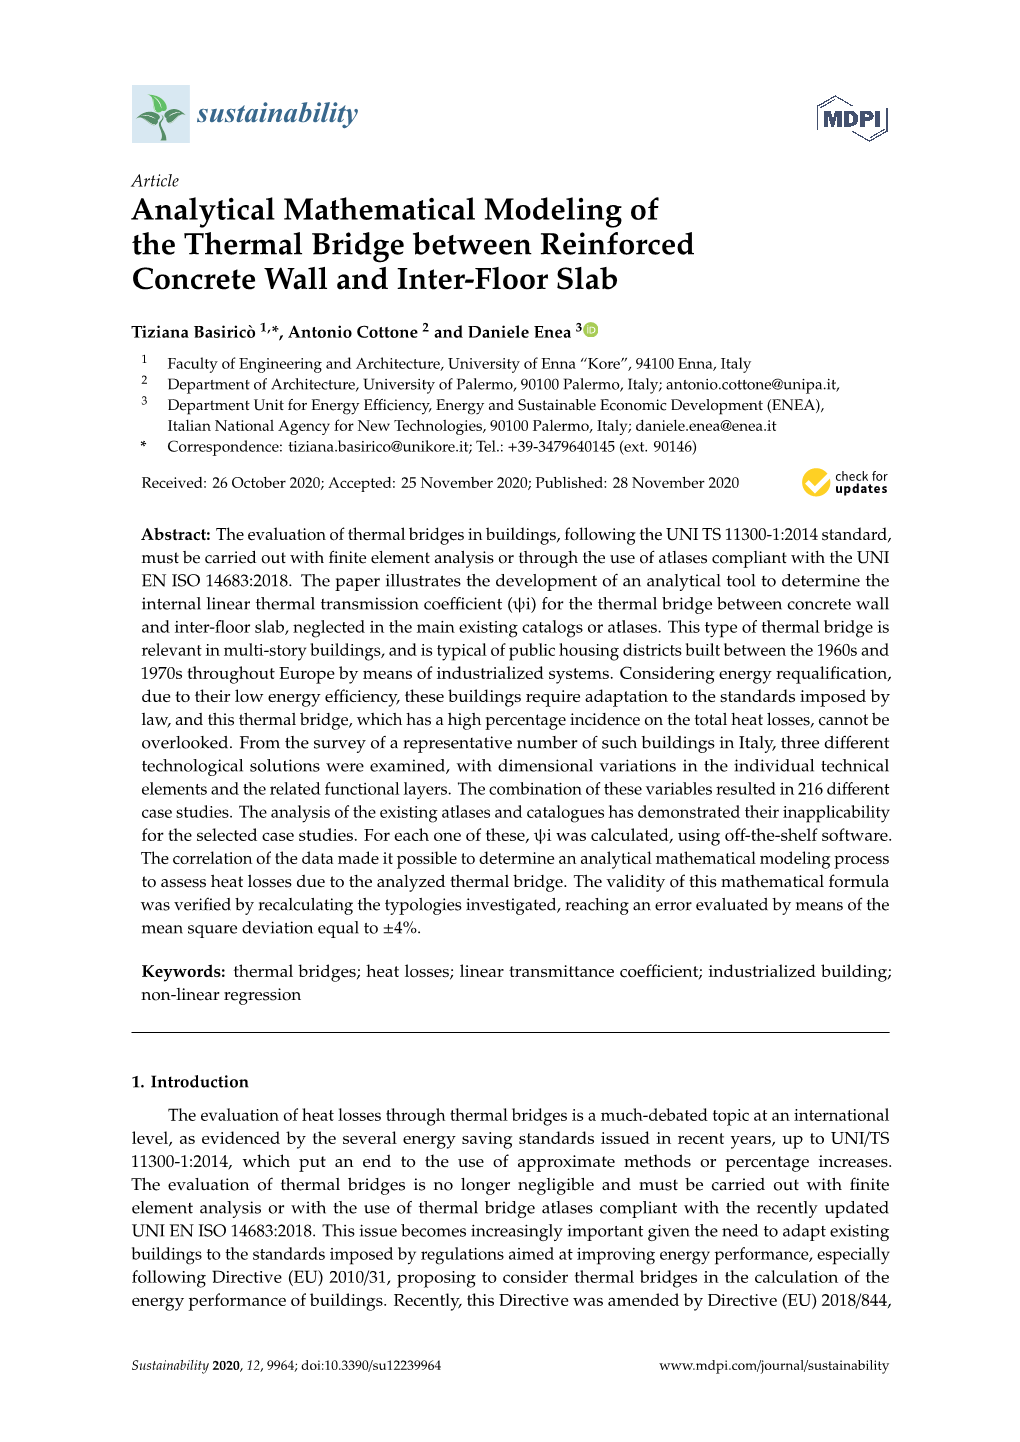 Analytical Mathematical Modeling of the Thermal Bridge Between Reinforced Concrete Wall and Inter-Floor Slab